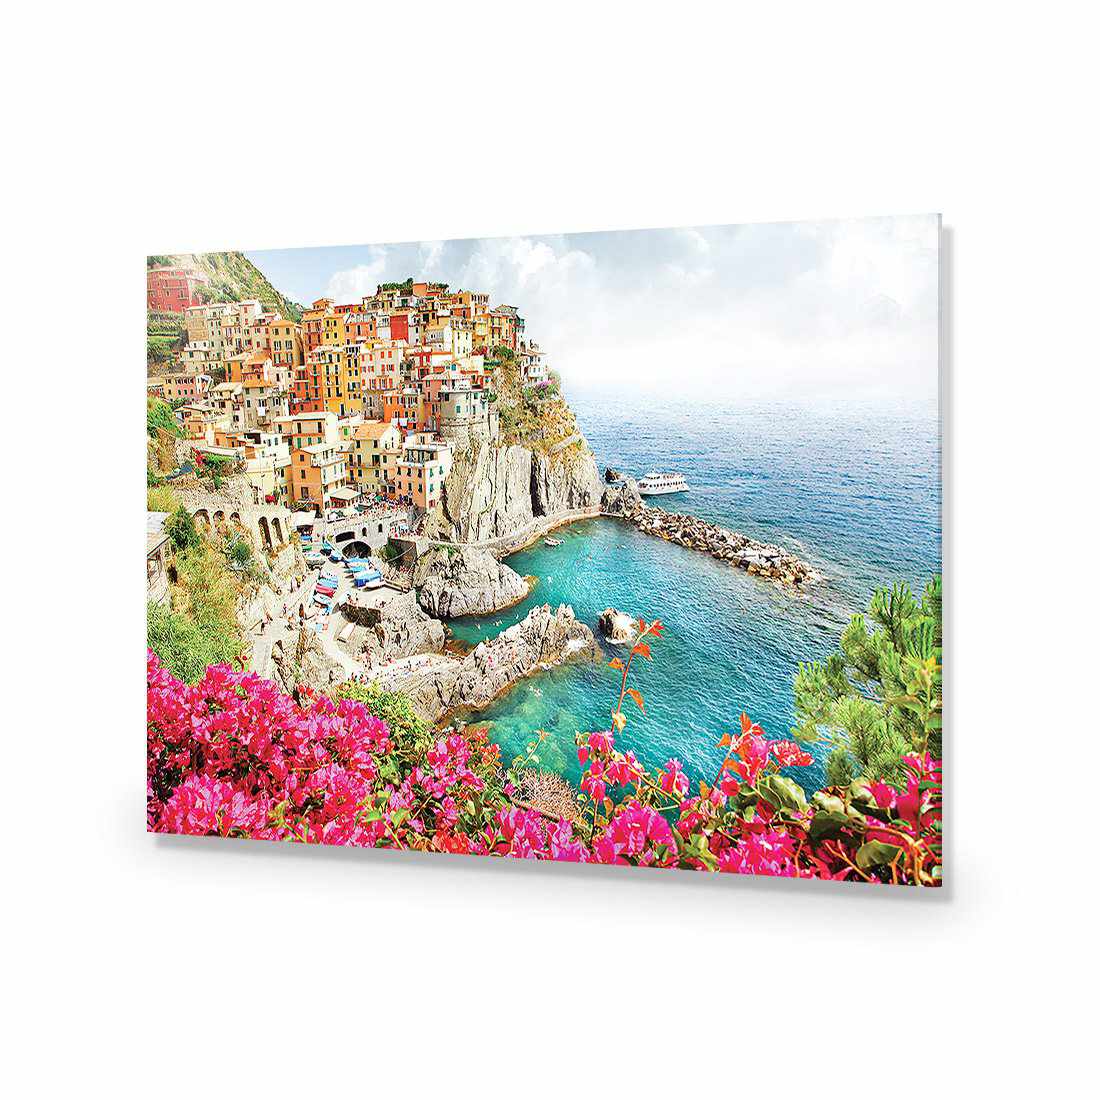 Cinque Terre in Italy-Acrylic-Wall Art Design-Without Border-Acrylic - No Frame-45x30cm-Wall Art Designs